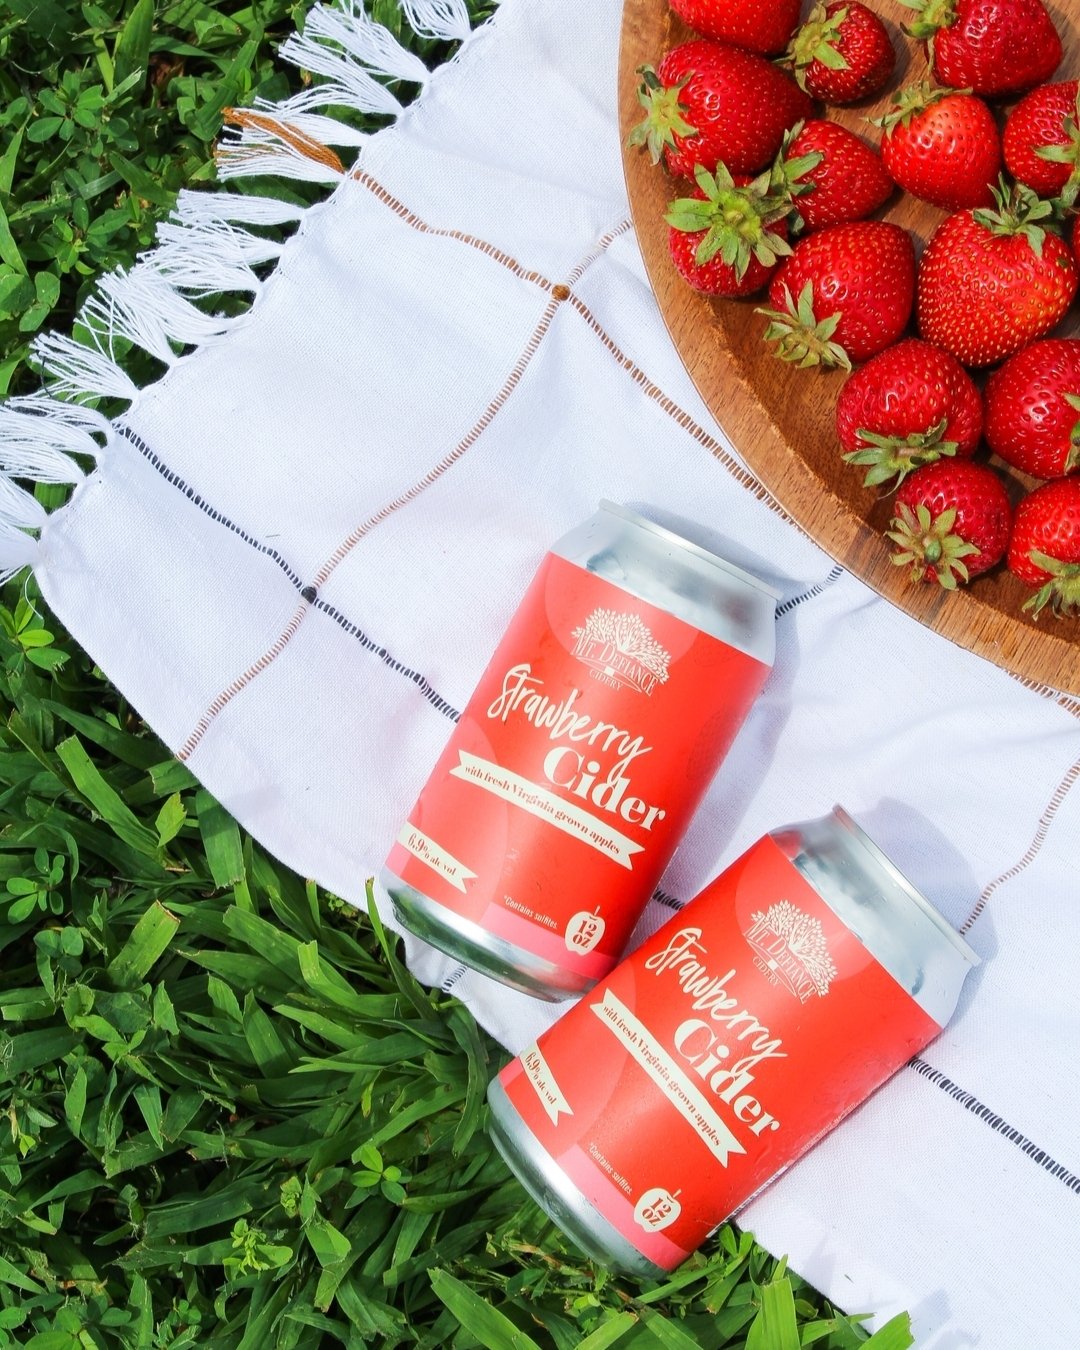 Summer is right around the corner and we are ready for summer drinks. 🍓🍓🍓

Our strawberry cider is the perfect summer sipper. Snag a four pack on your next visit to the Cider Barn. 

#cider #craftcider #virginiacider